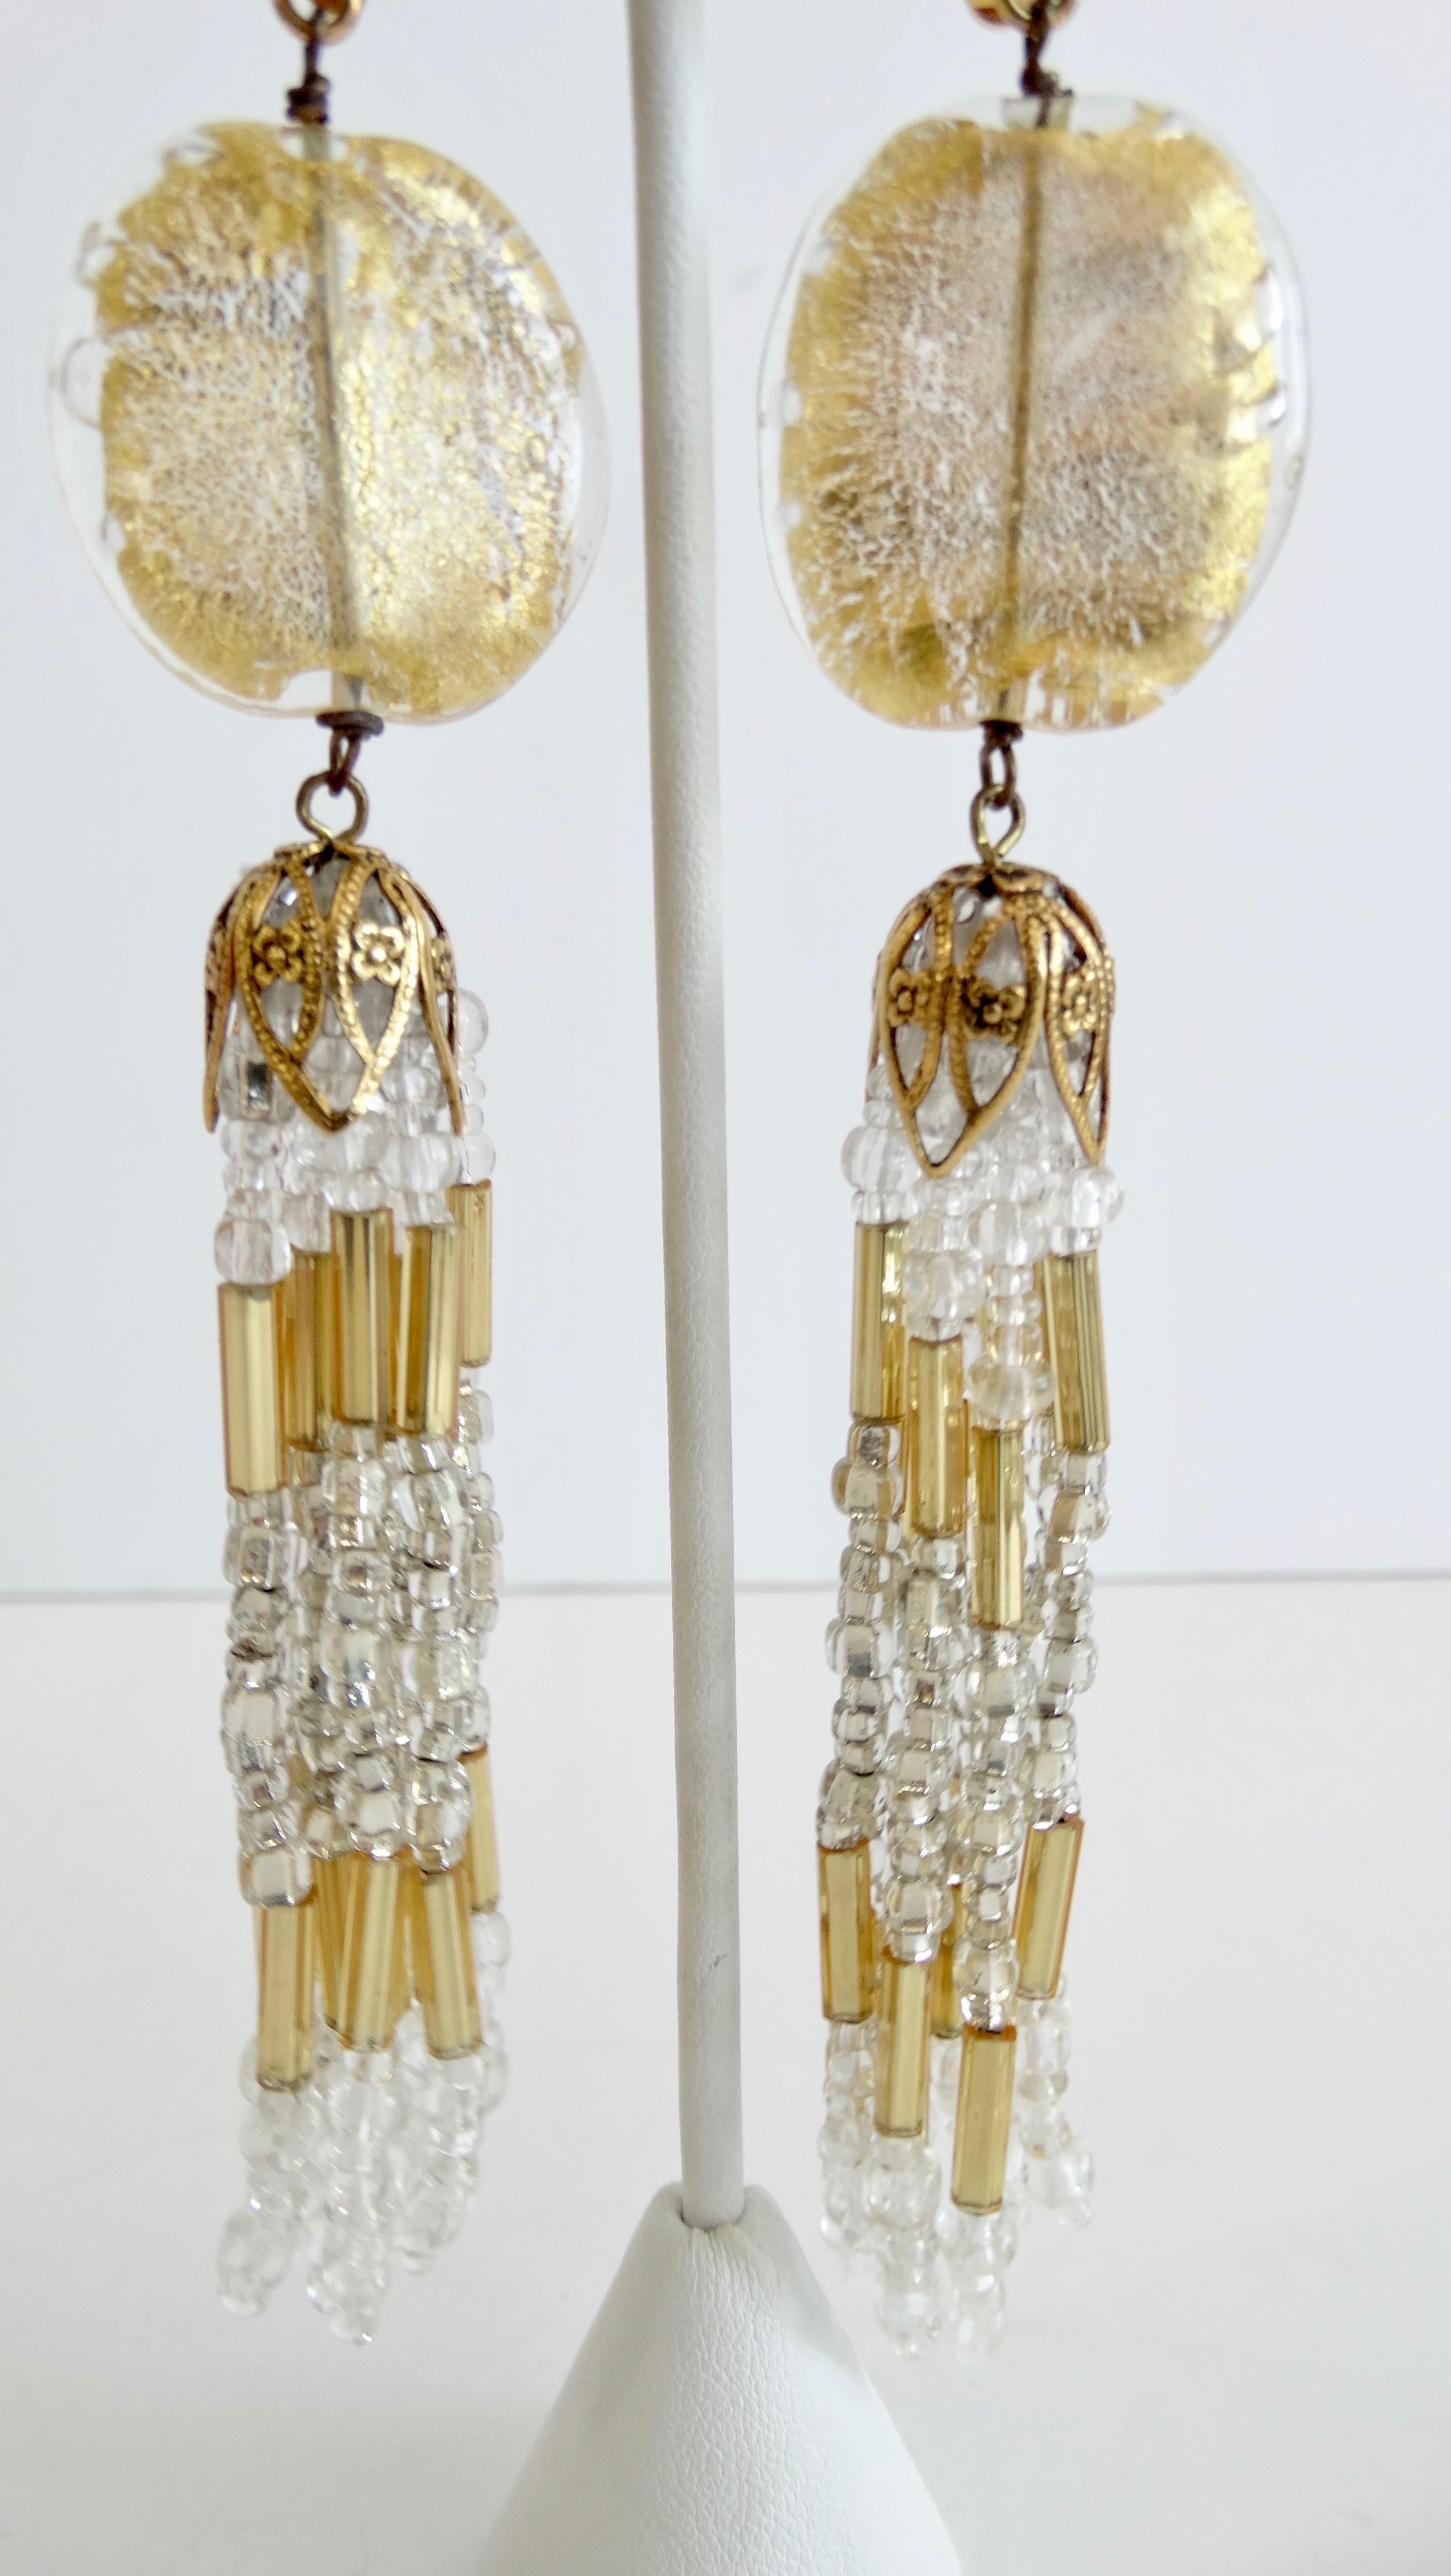 Show off your love for vintage jewelry with these amazing eye-catching dangle earrings! Circa 1980s, these dangle earrings feature a detailed Baroque inspired gold toned clip on closure, a gold dusted bead and beautiful strands of clear and gold